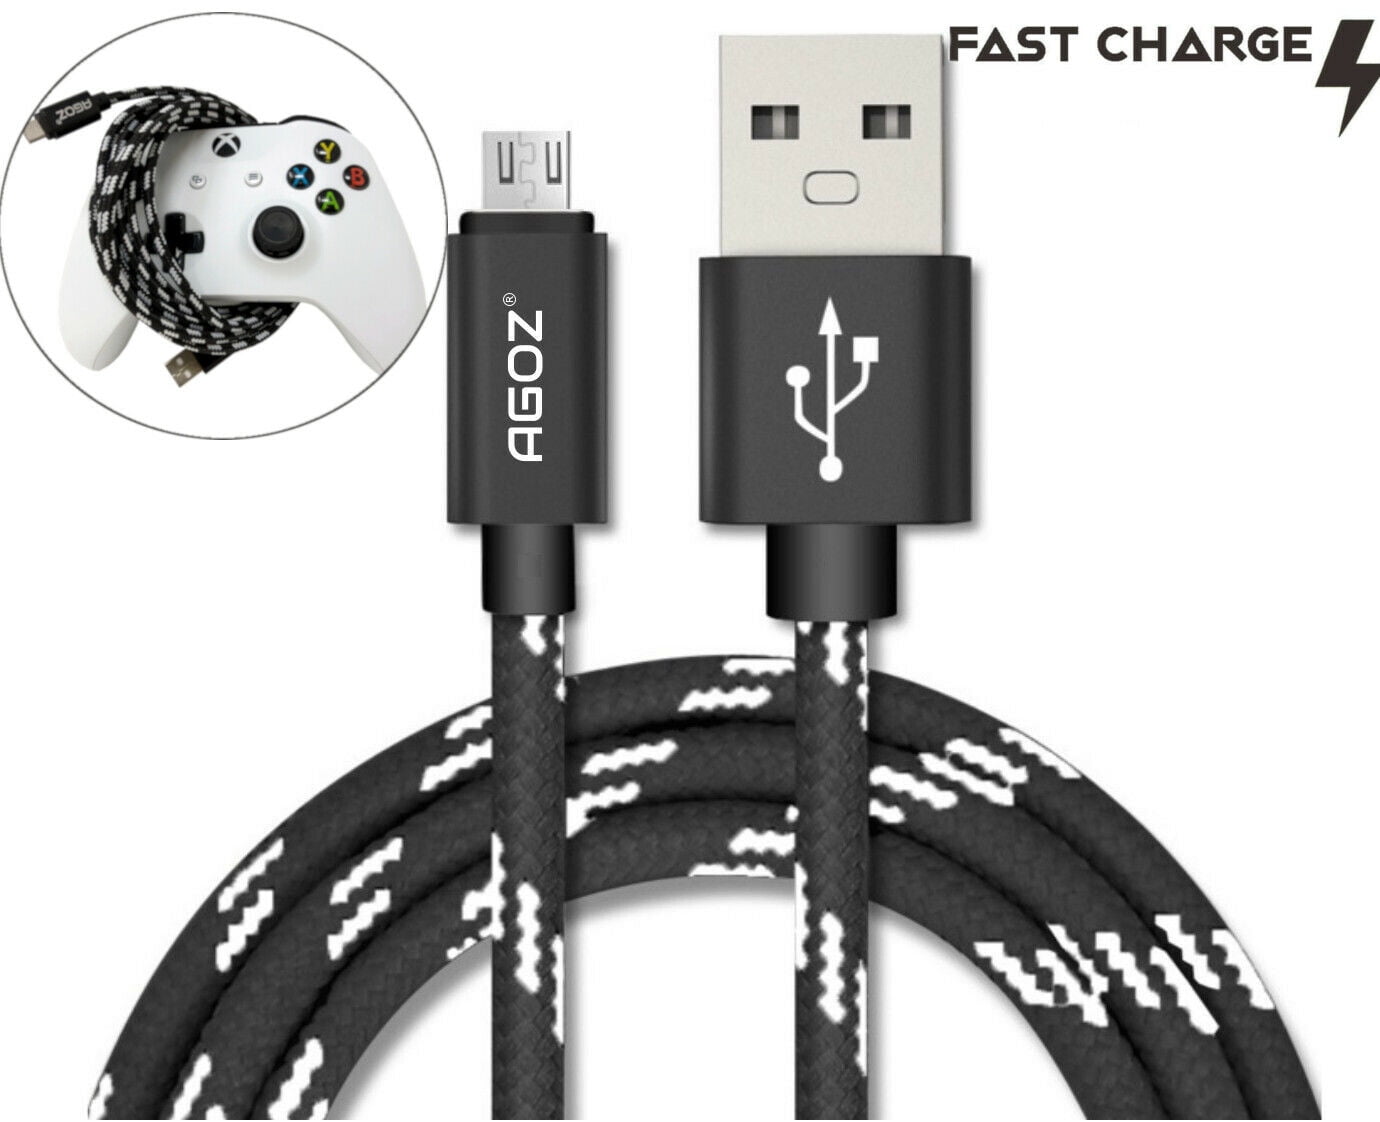 Authentic Short 8inch USB Type-C Cable for GoPro Hero6 Black Also Fast Quick Charges Plus Data Transfer! White 